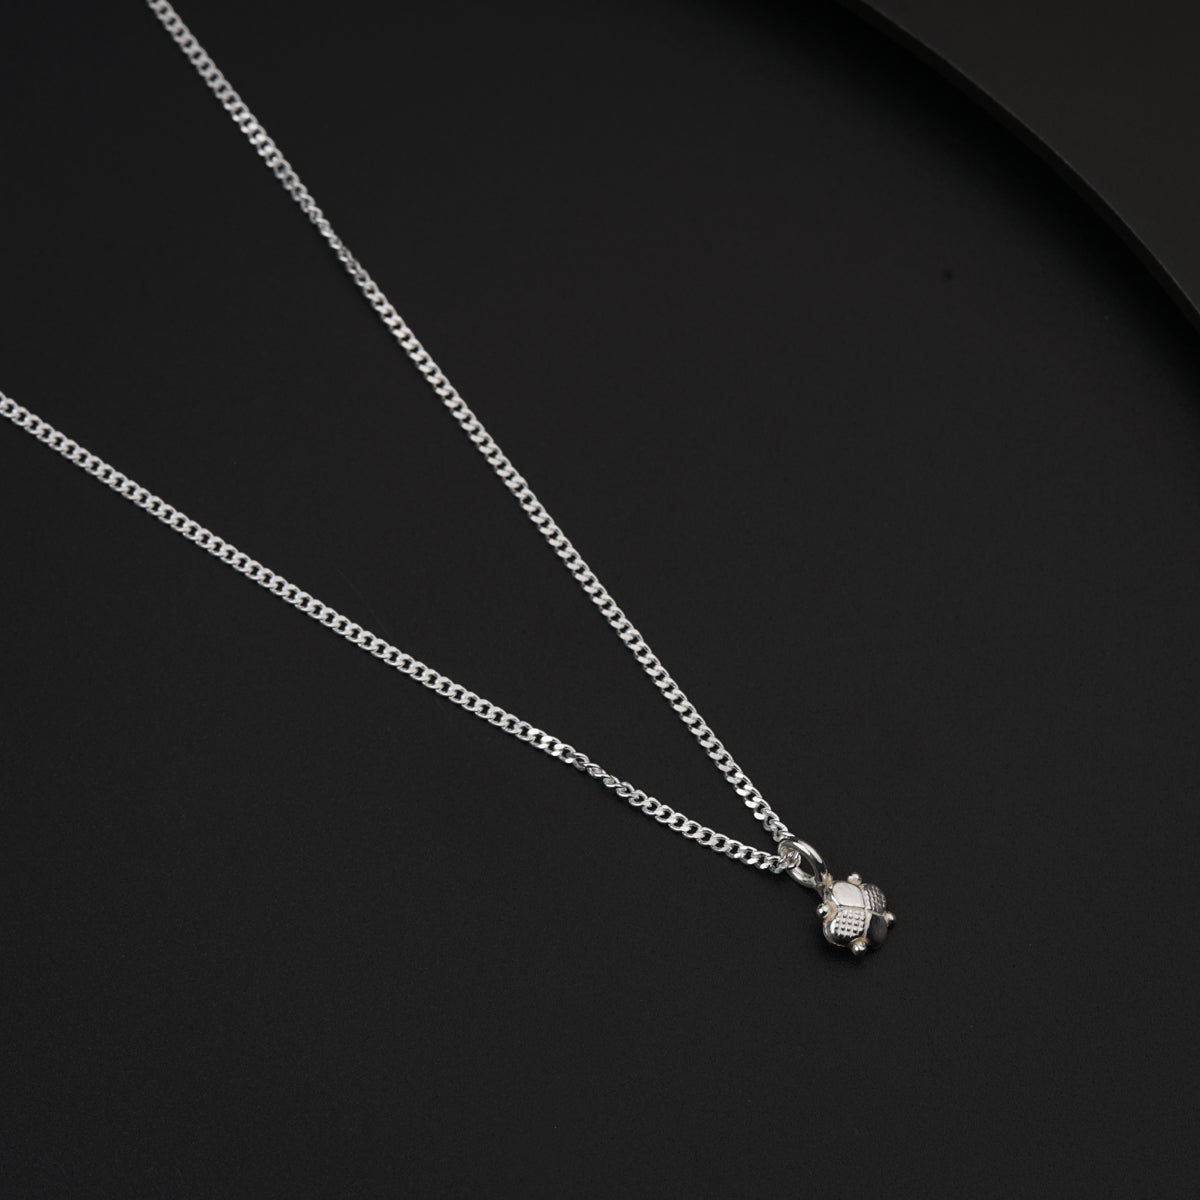 Daily Wear Silver Shiny Clover Necklace